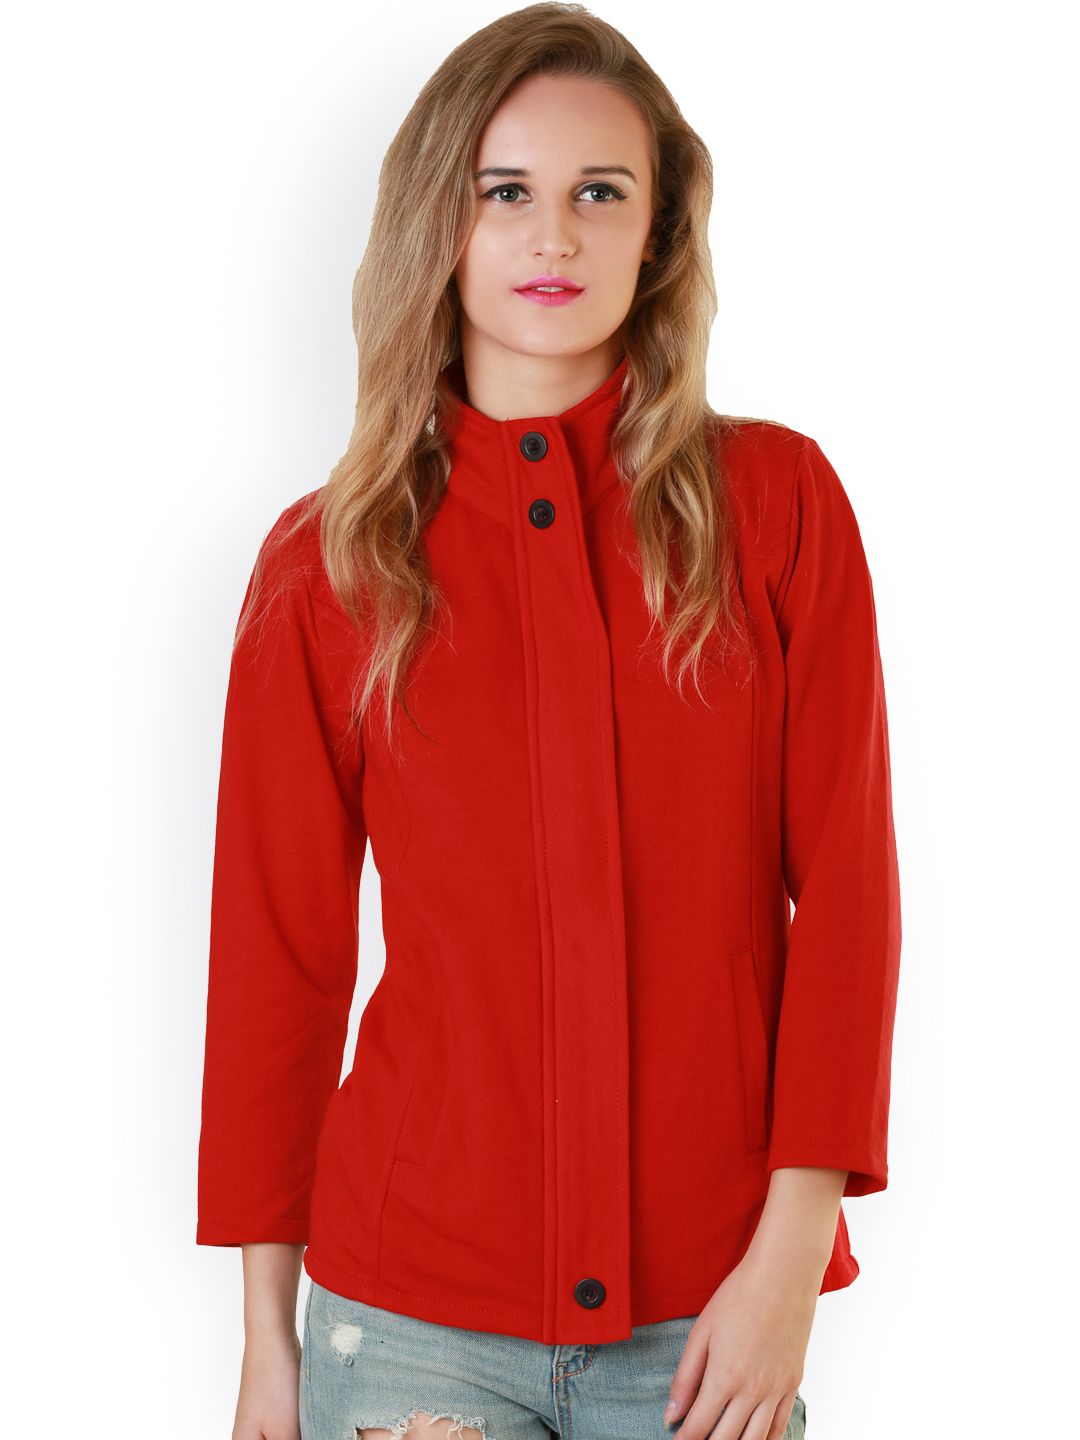 Belle Fille Red Tailored Jacket Price in India